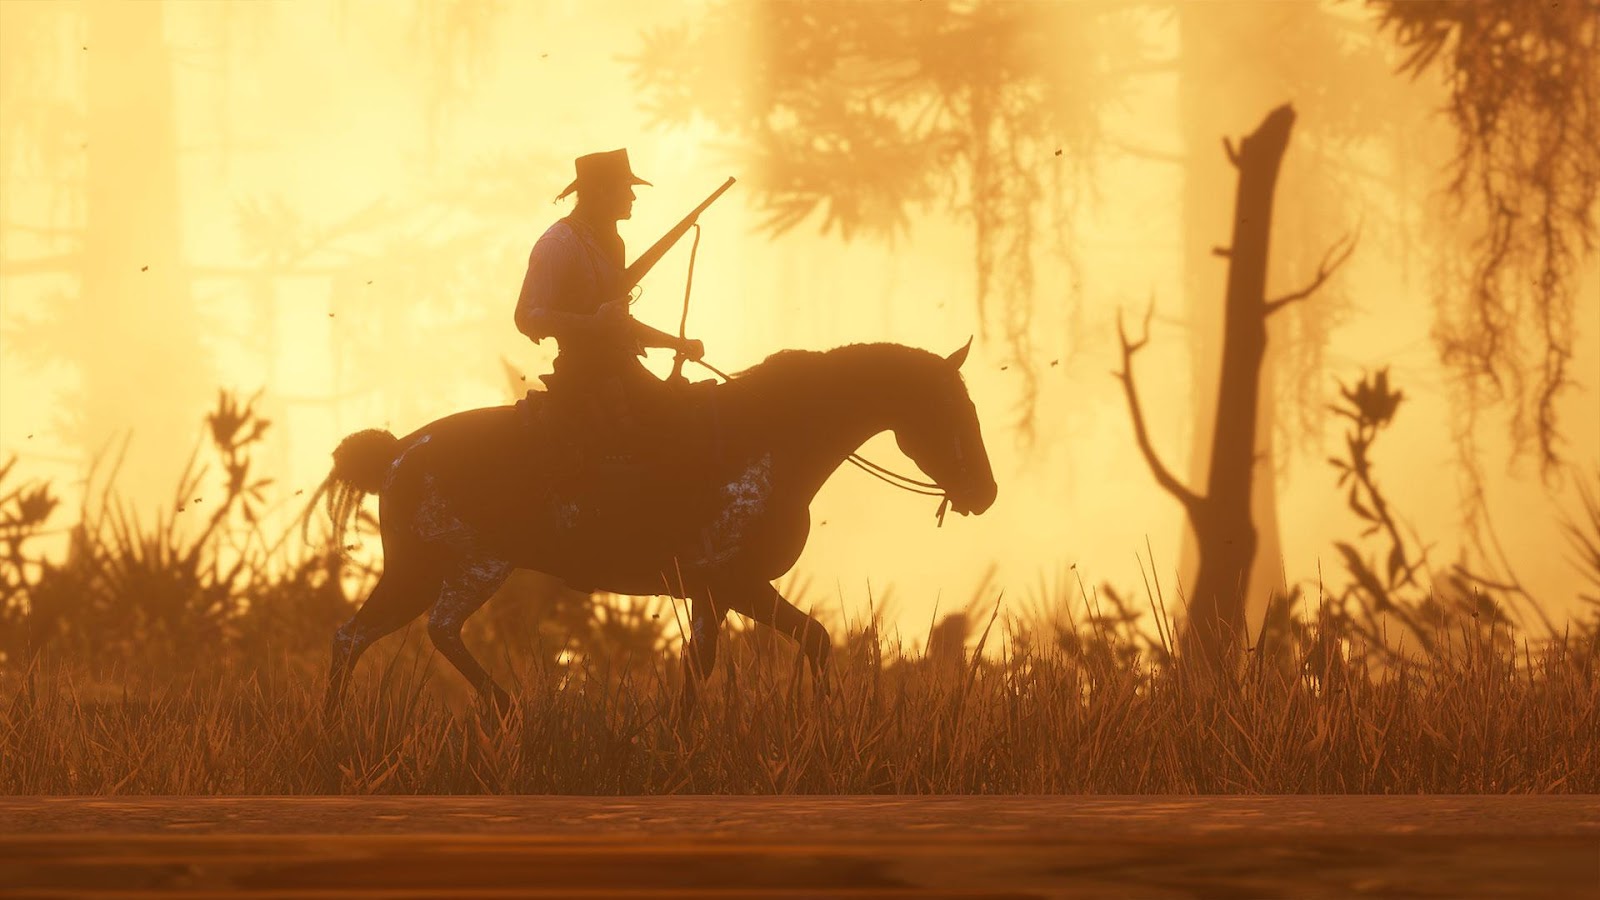 A screenshot of Arthur Morgan riding a horse from Red Dead Redemption 2. 